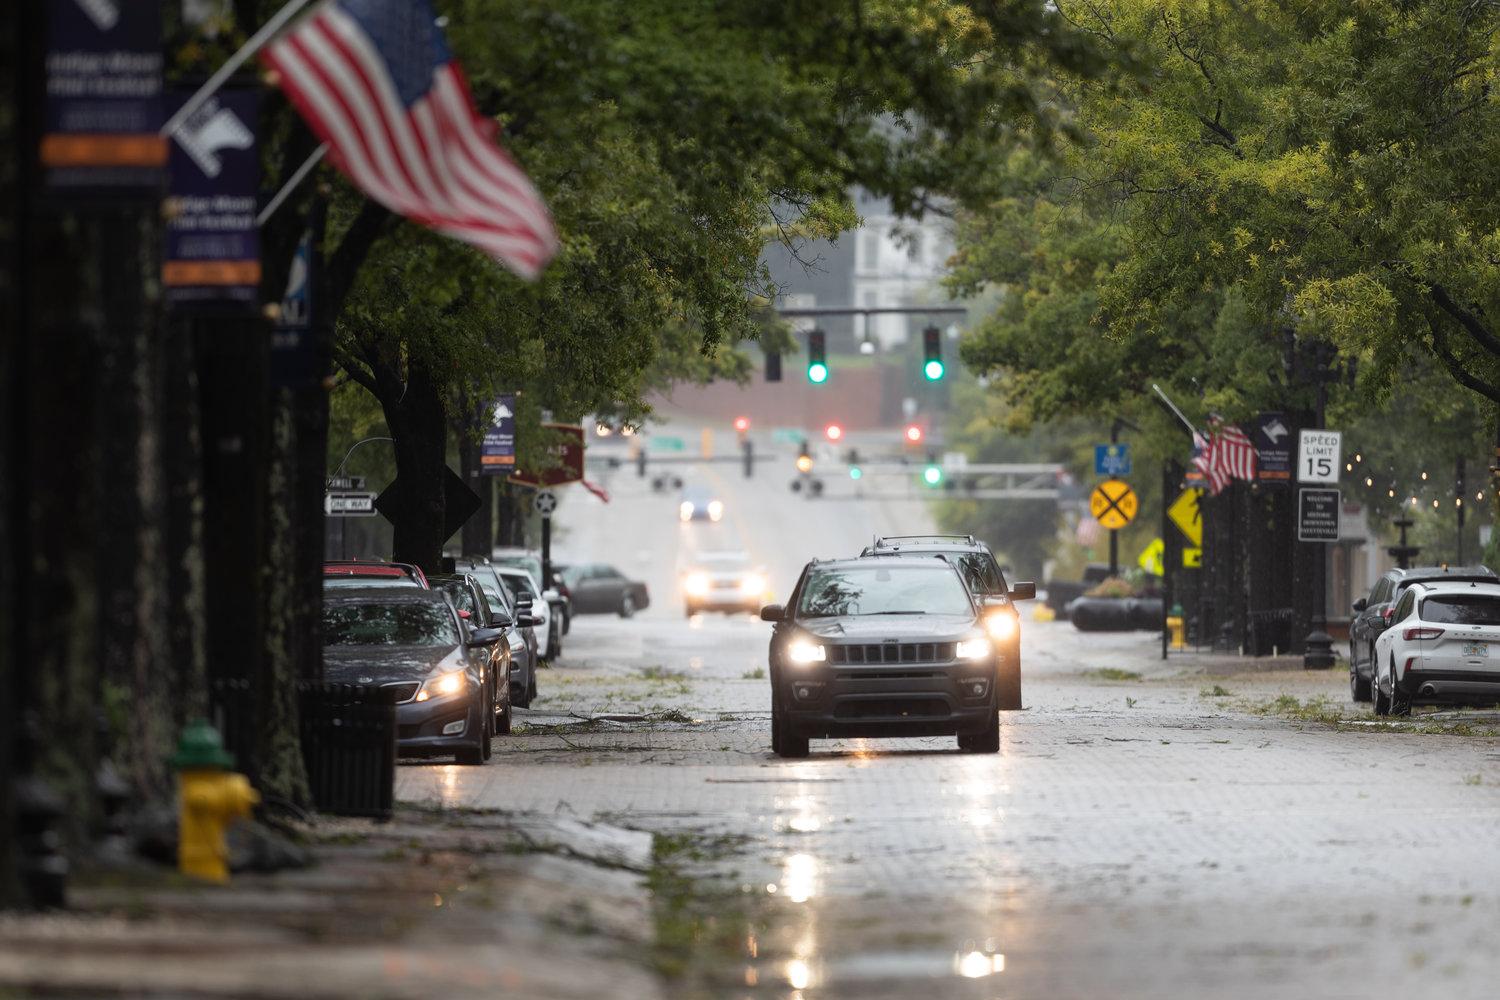 The remnants of Hurricane Ian brought strong winds and rain to the area Friday.